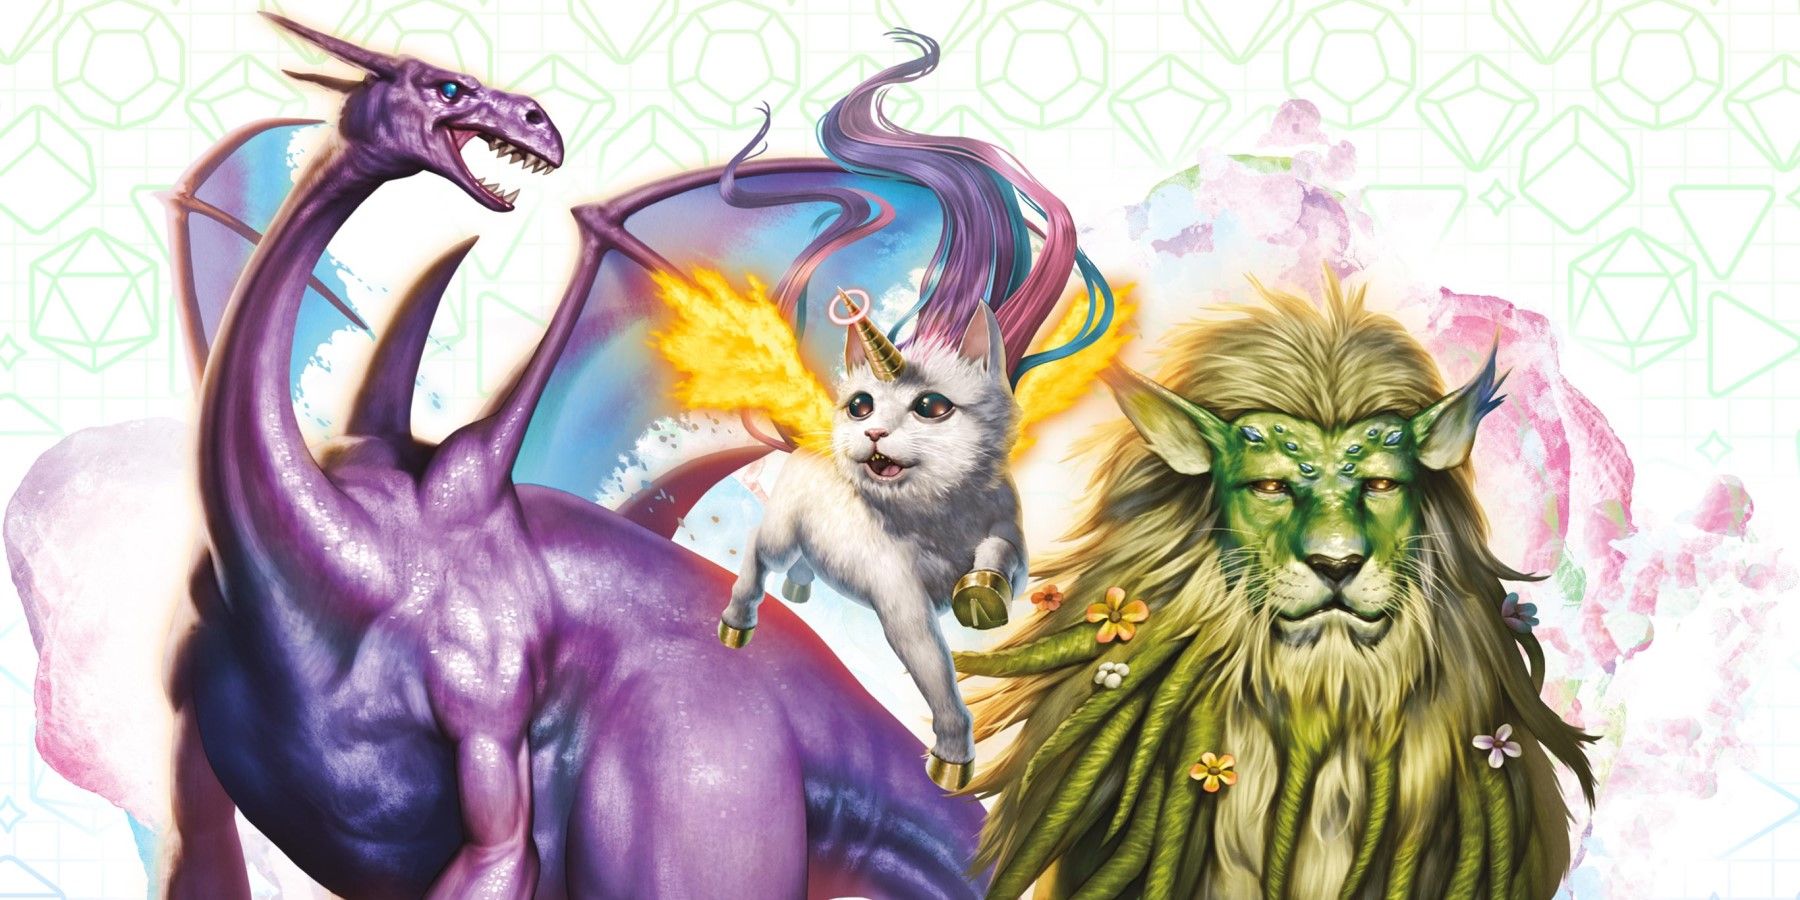 New Dungeons and Dragons Book Features Monsters Designed by Kids